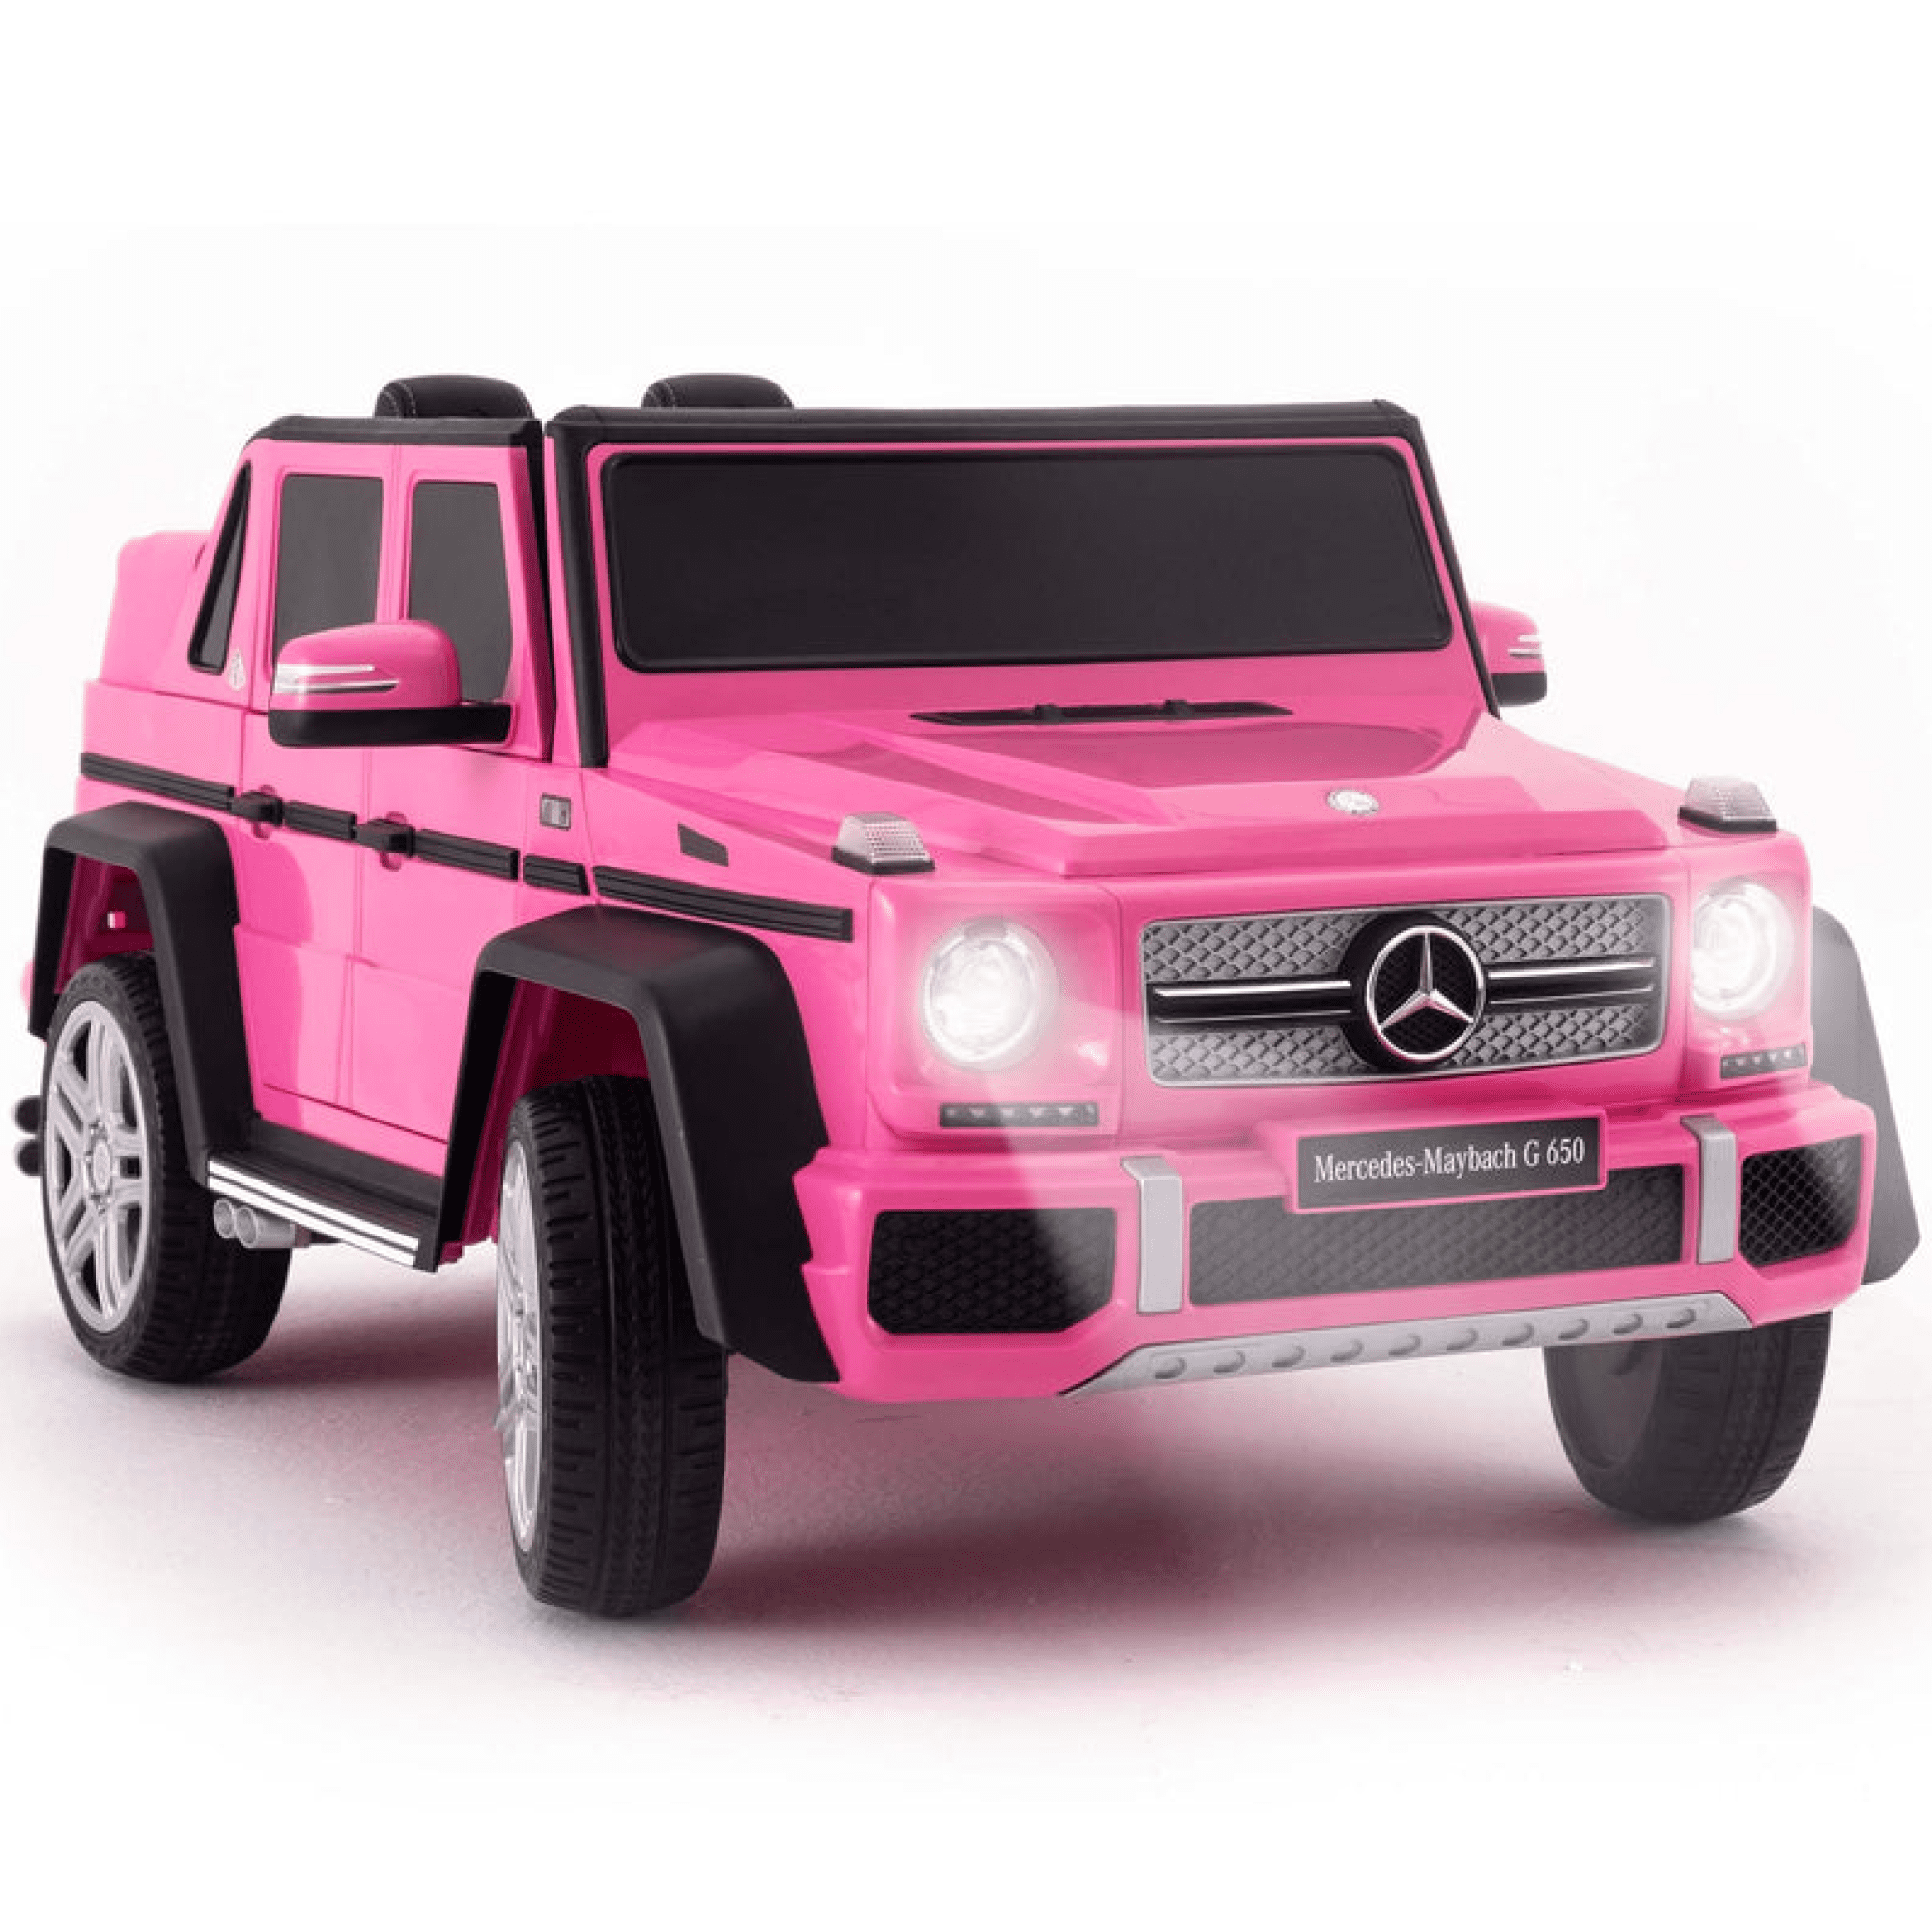 12V Electric Kids Ride On Car Toy 3 Speed w/Remote Control Mercedes Benz G55 RED 